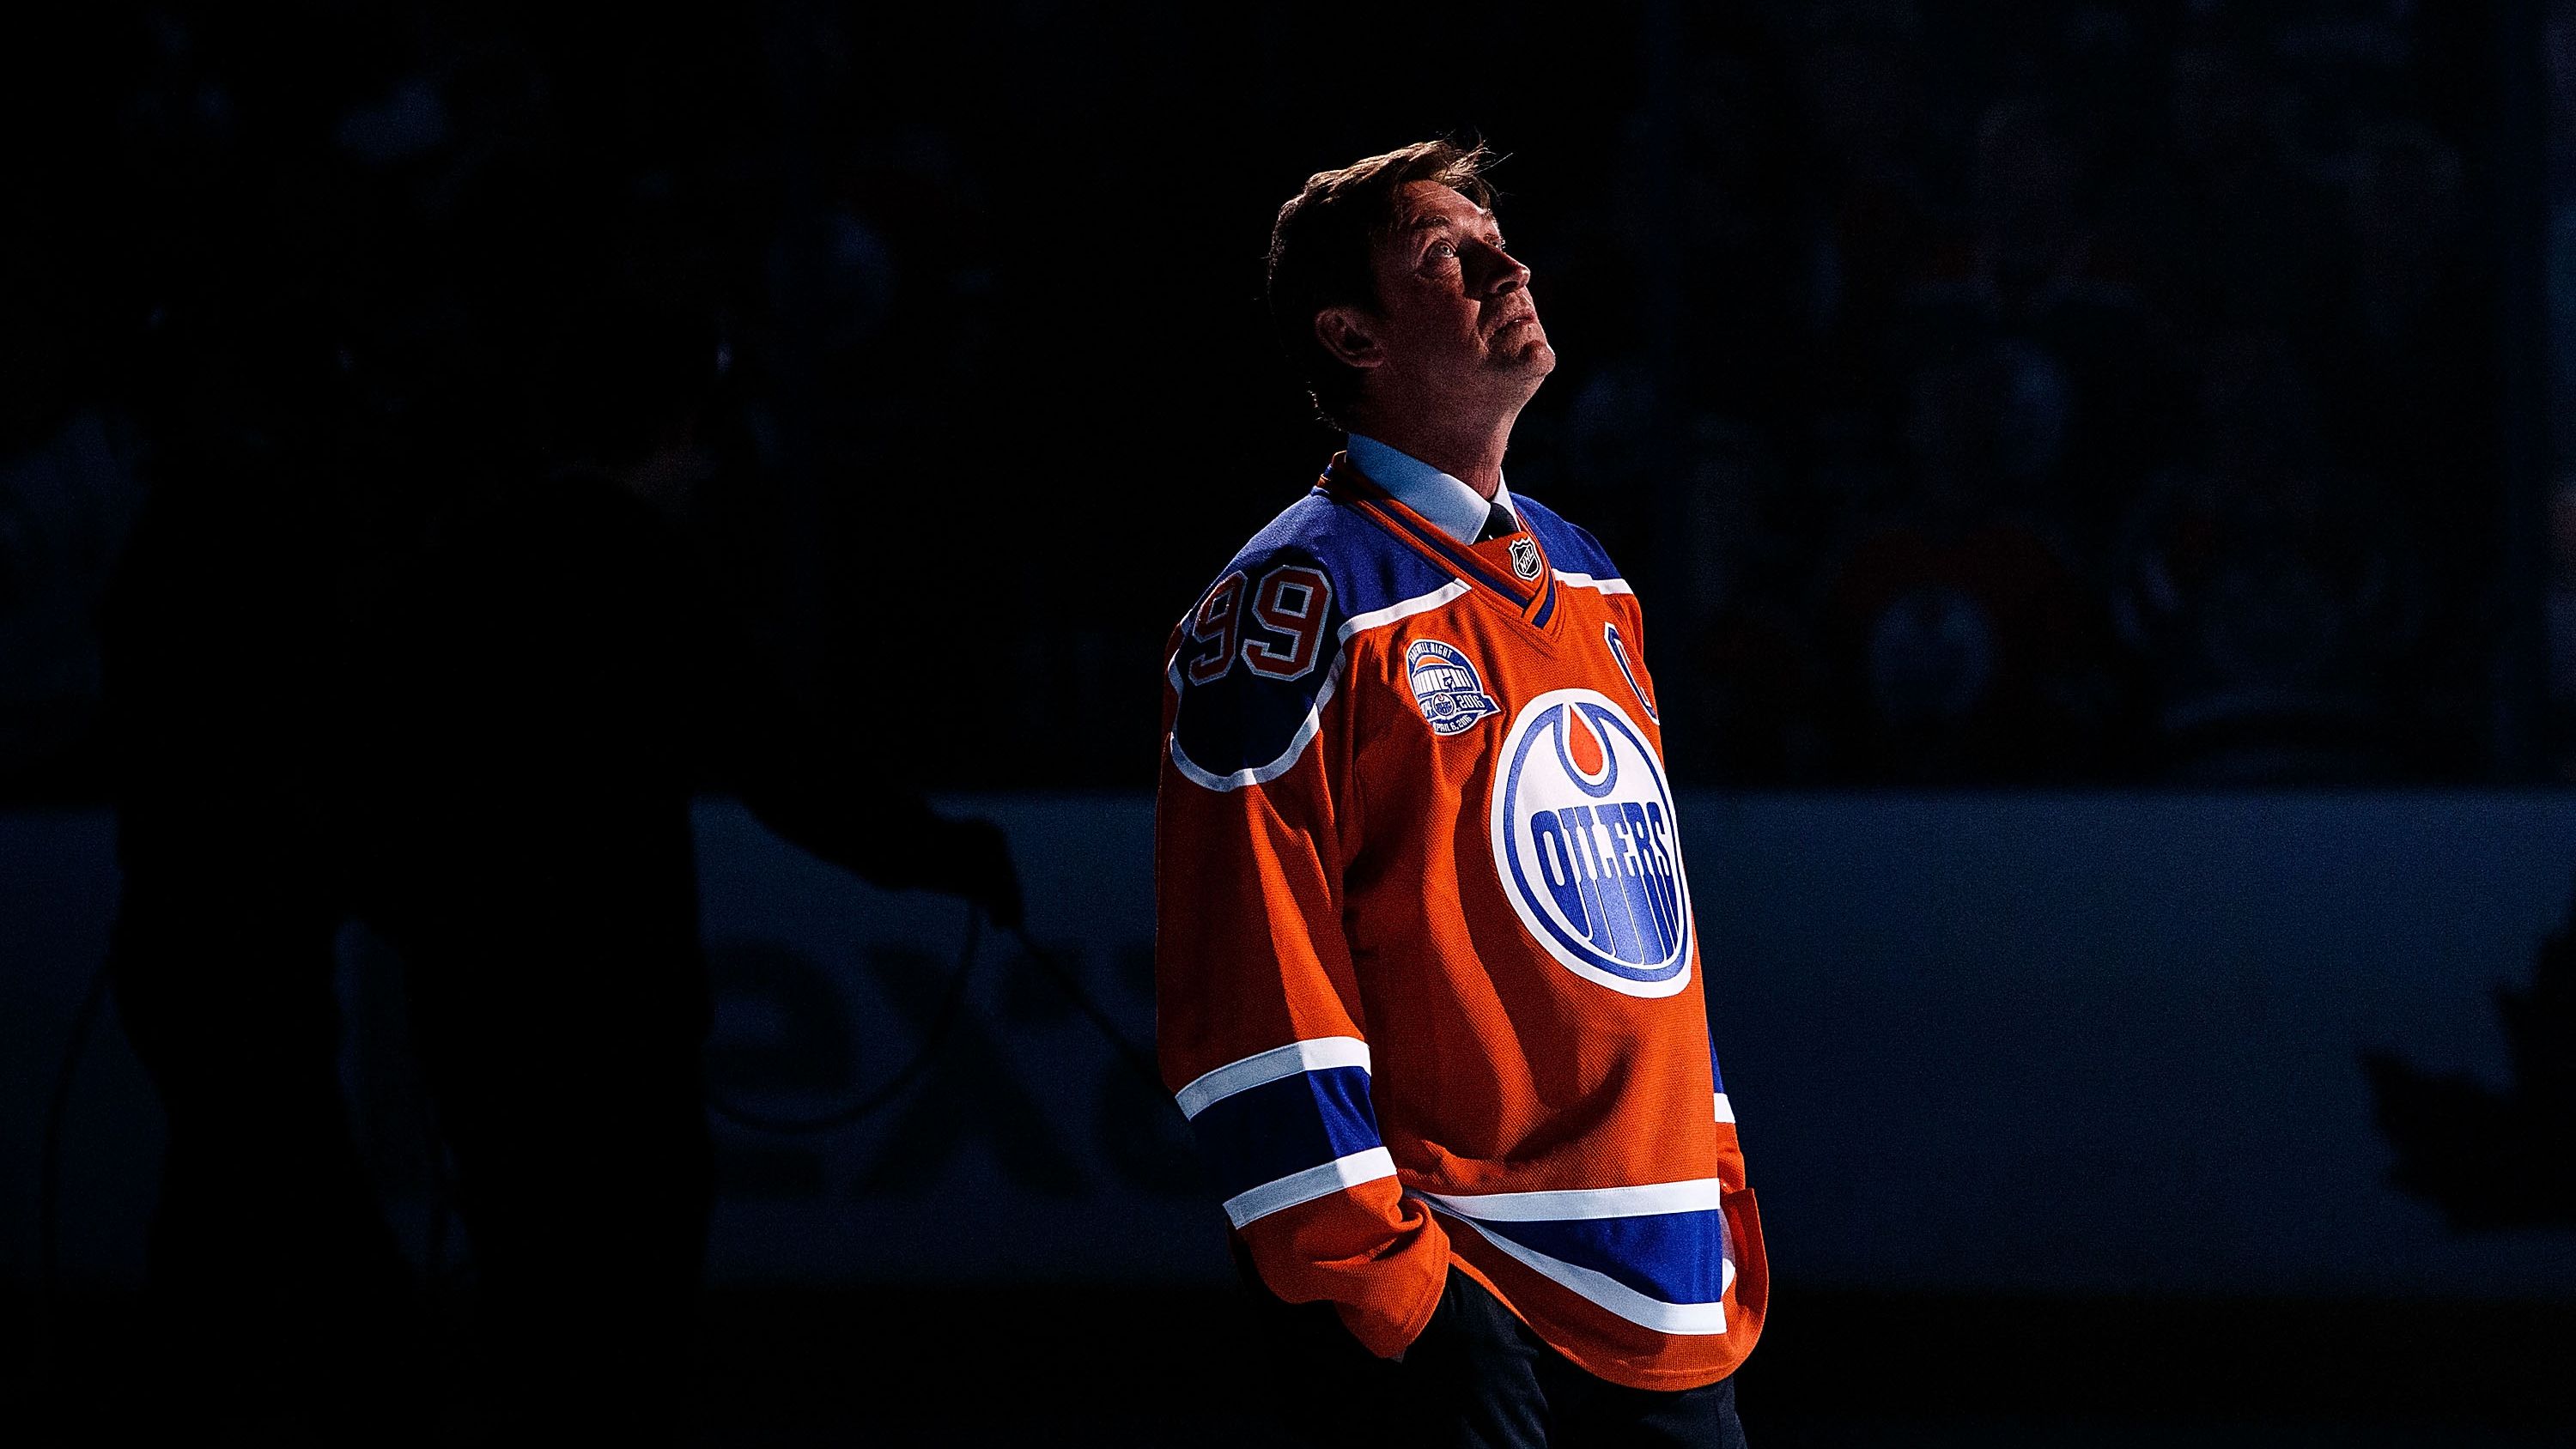 Wayne Gretzky returns to Oilers in executive role - SI Kids